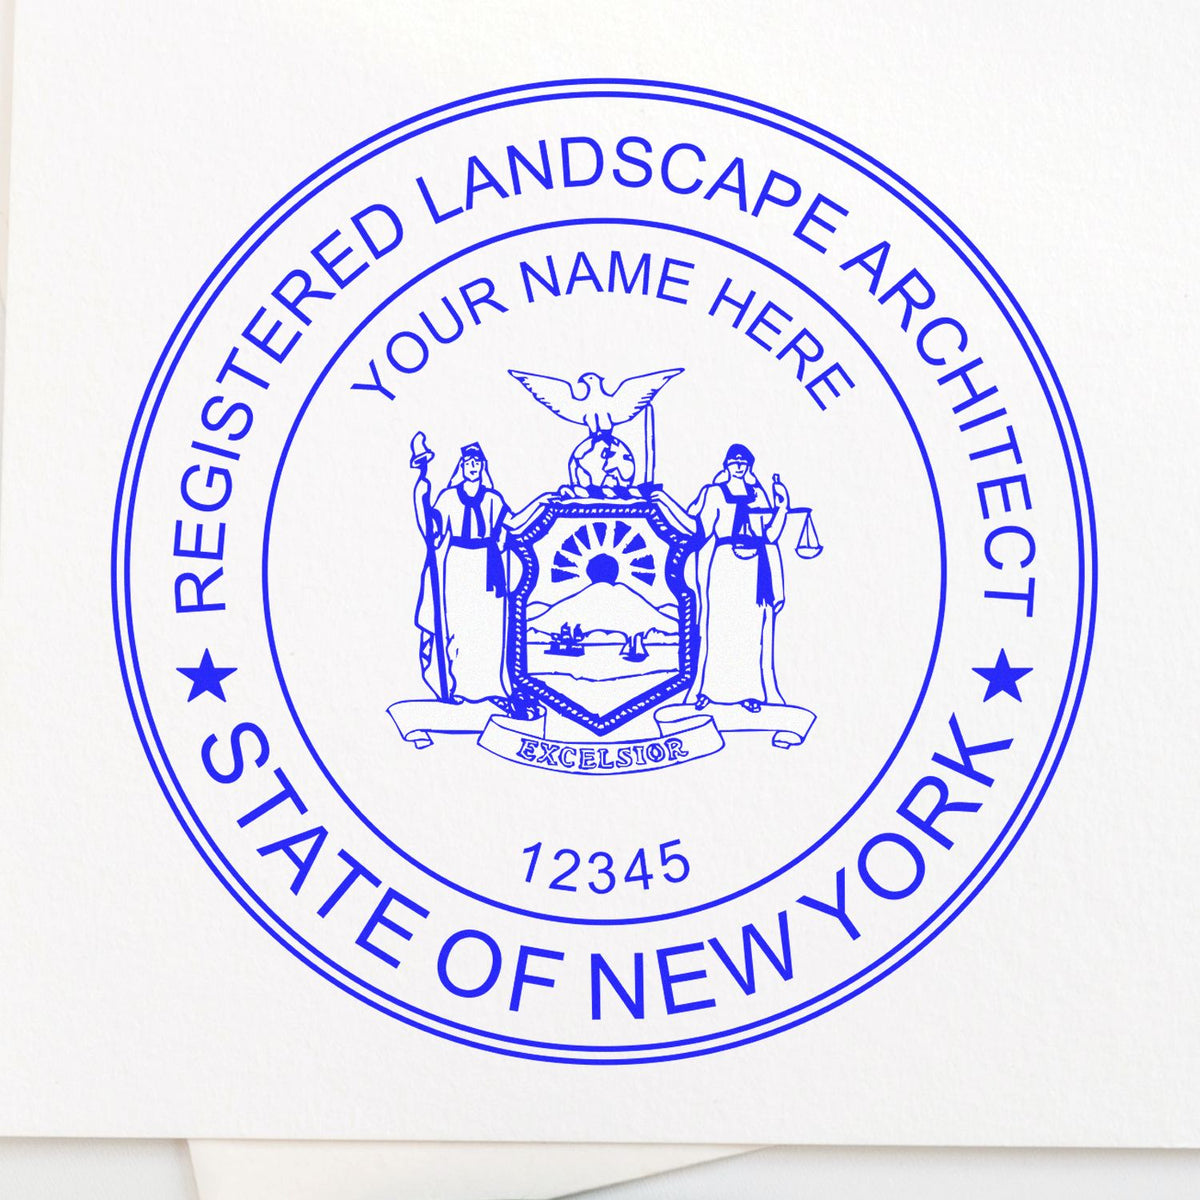 The Slim Pre-Inked New York Landscape Architect Seal Stamp stamp impression comes to life with a crisp, detailed photo on paper - showcasing true professional quality.